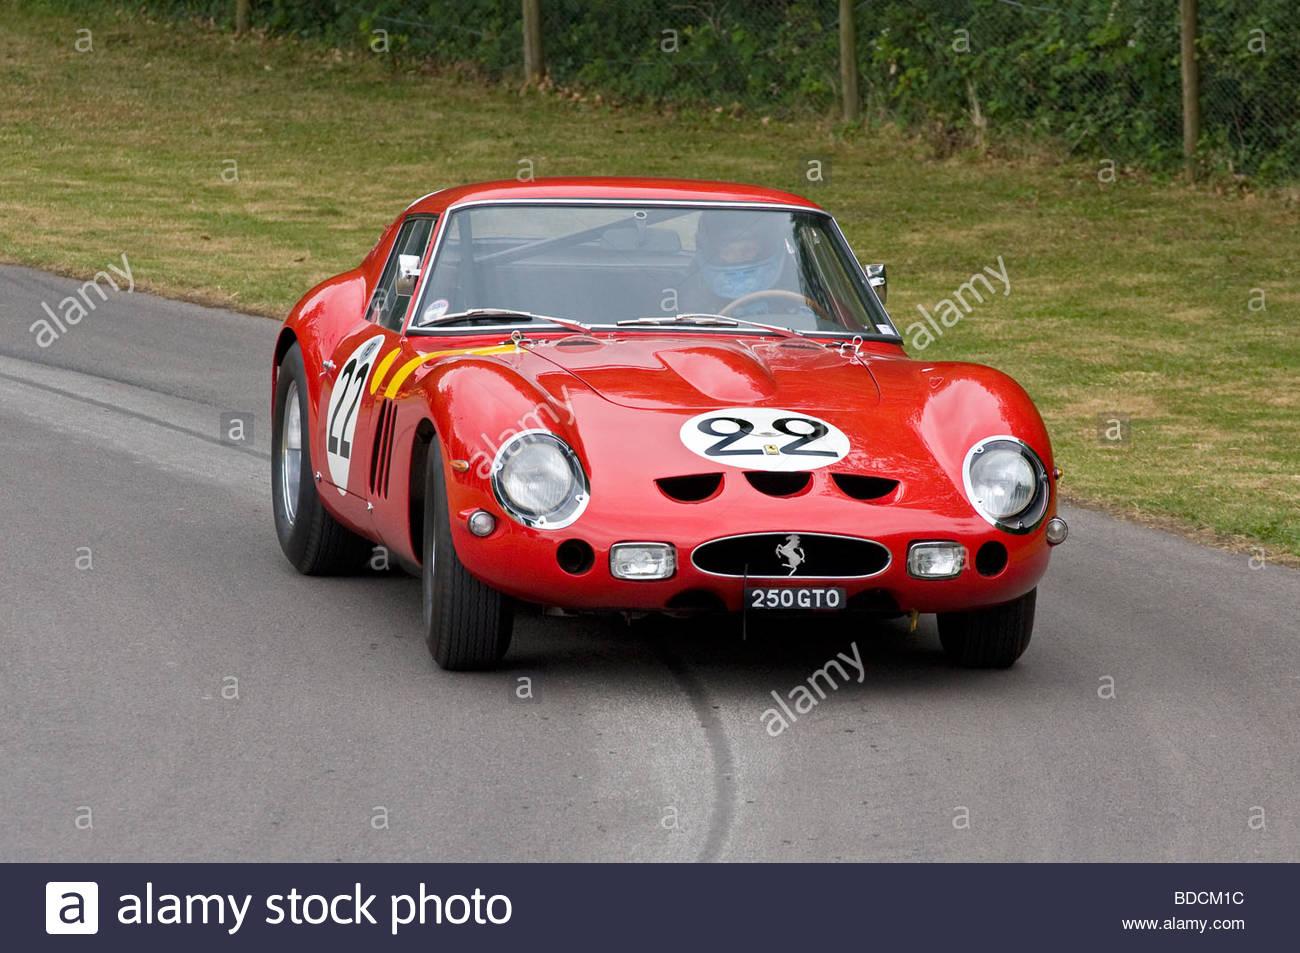 1962 Ferrari 250 GTO endurance racer at Goodwood Festival of Speed with driver Annette Mason. Sussex, UK, 2009.